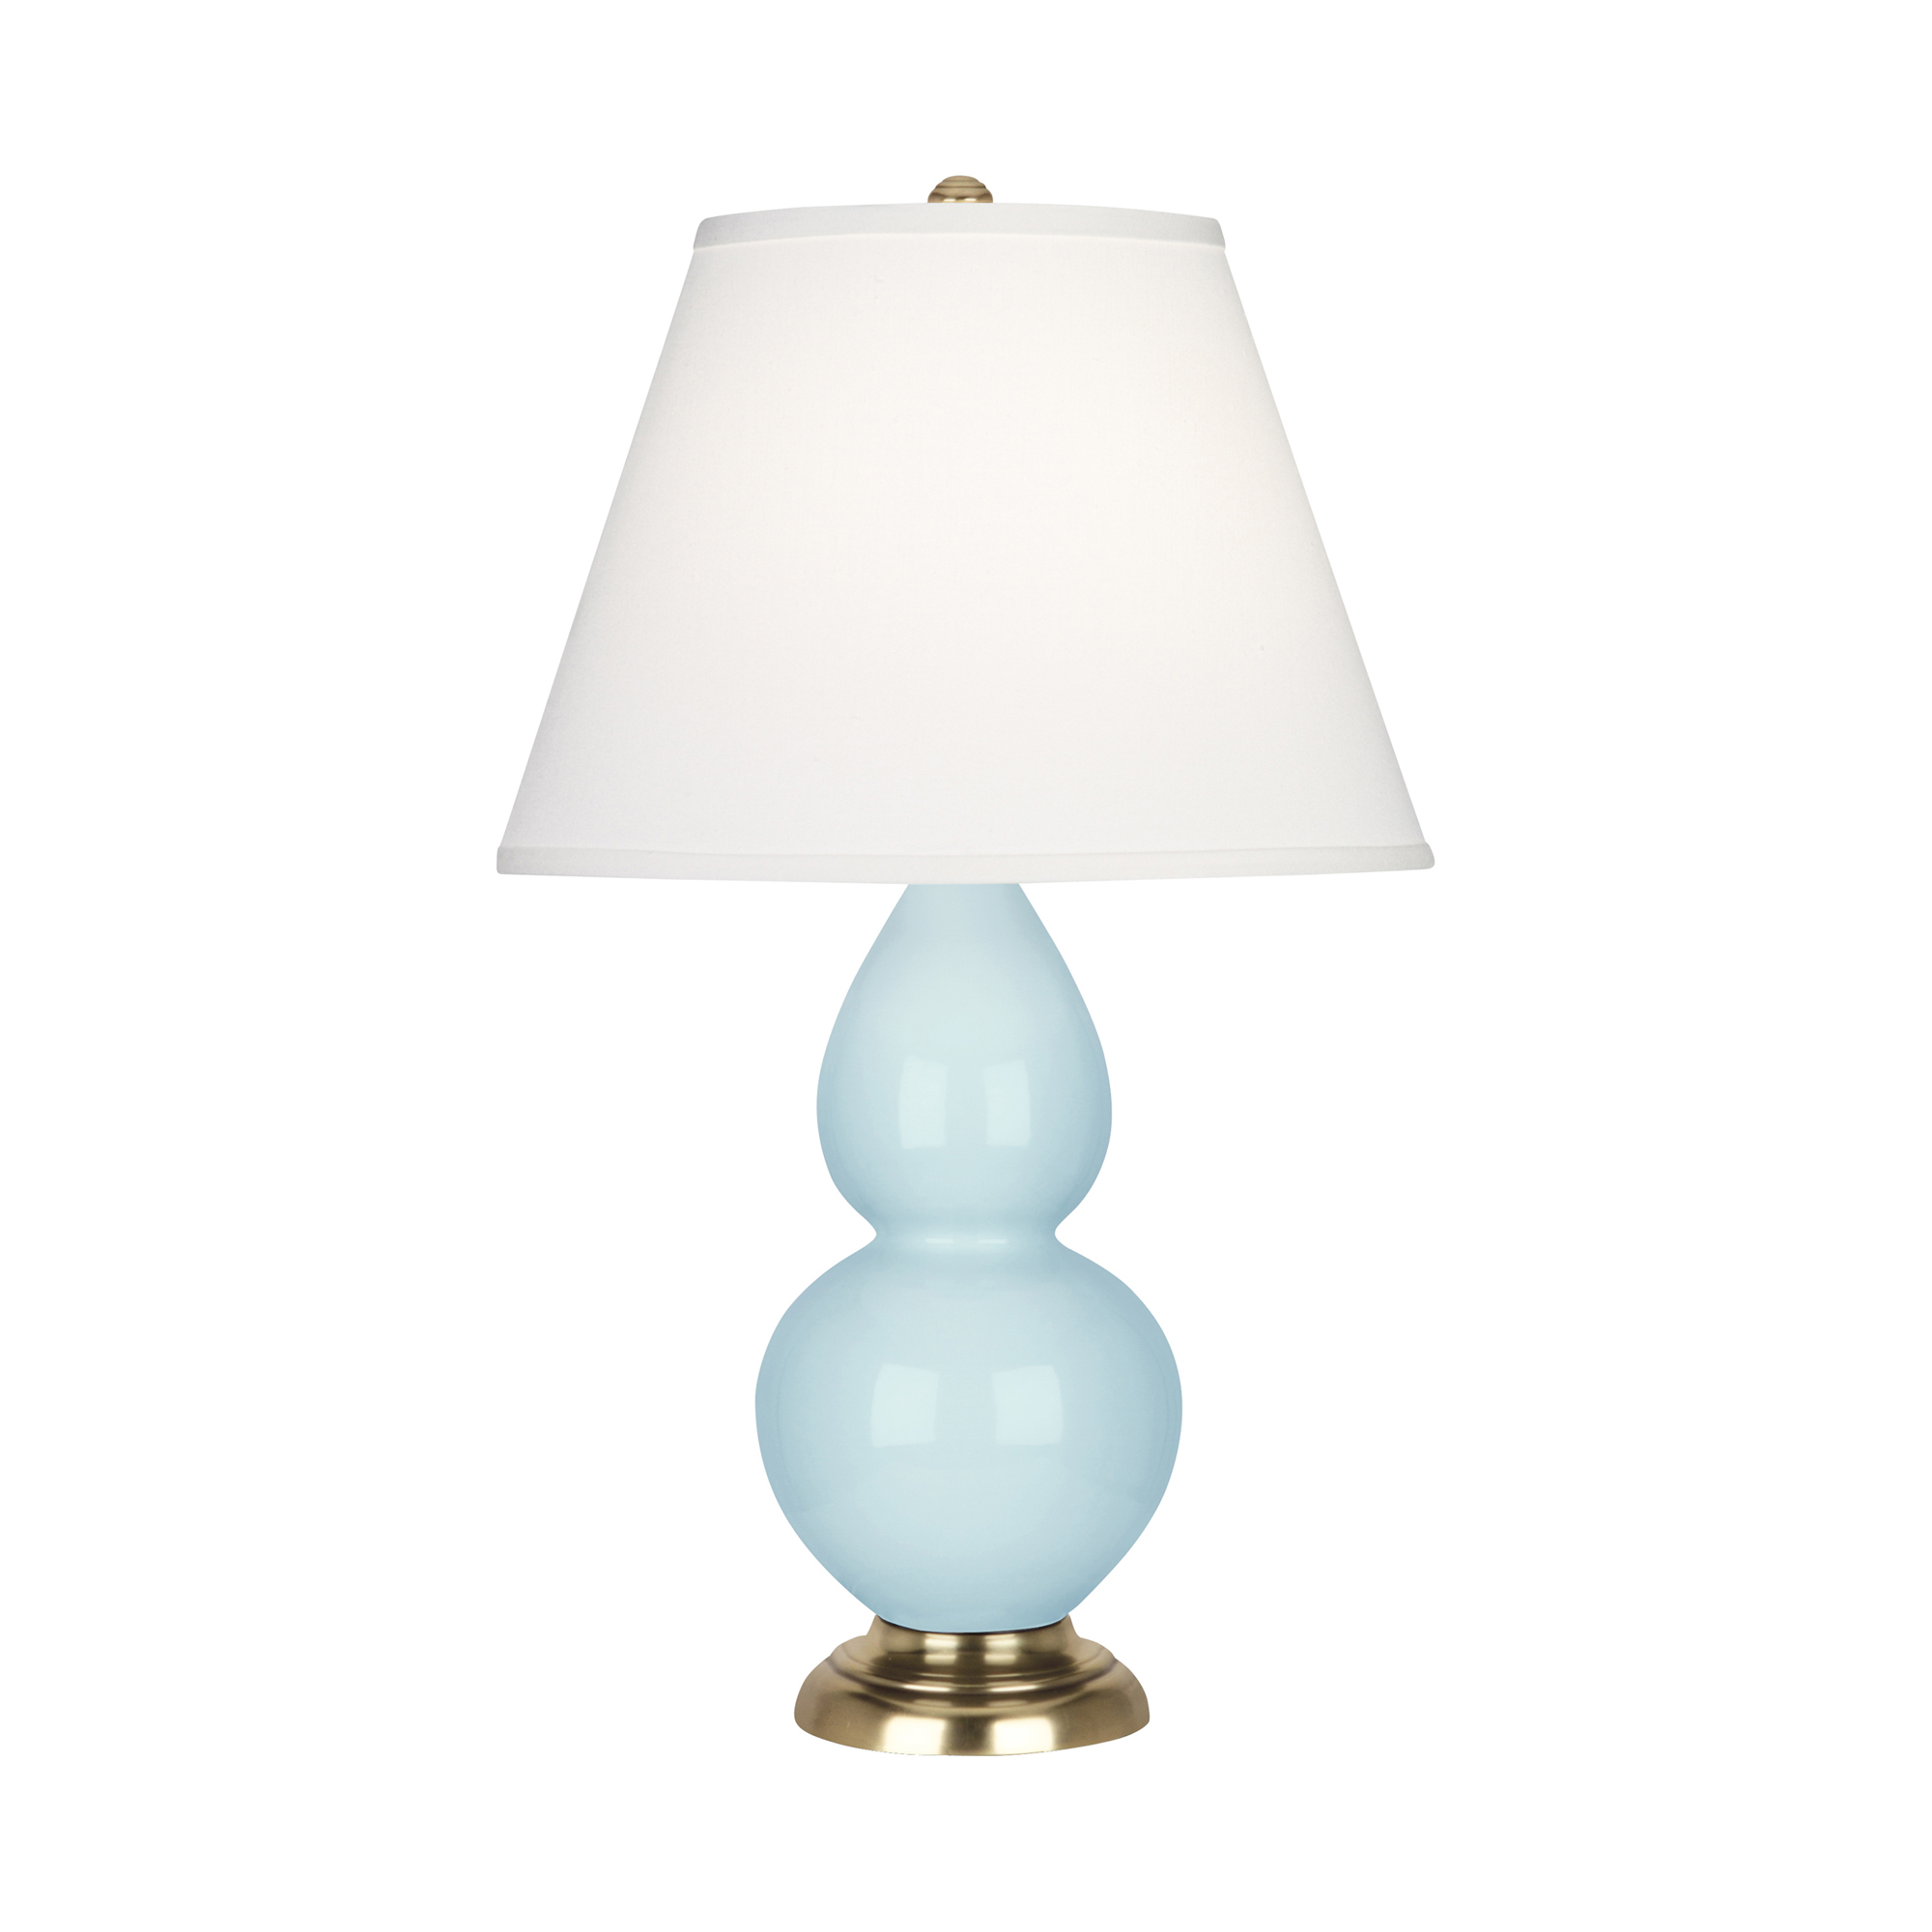 Small Double Gourd Accent Lamp Style #1689X